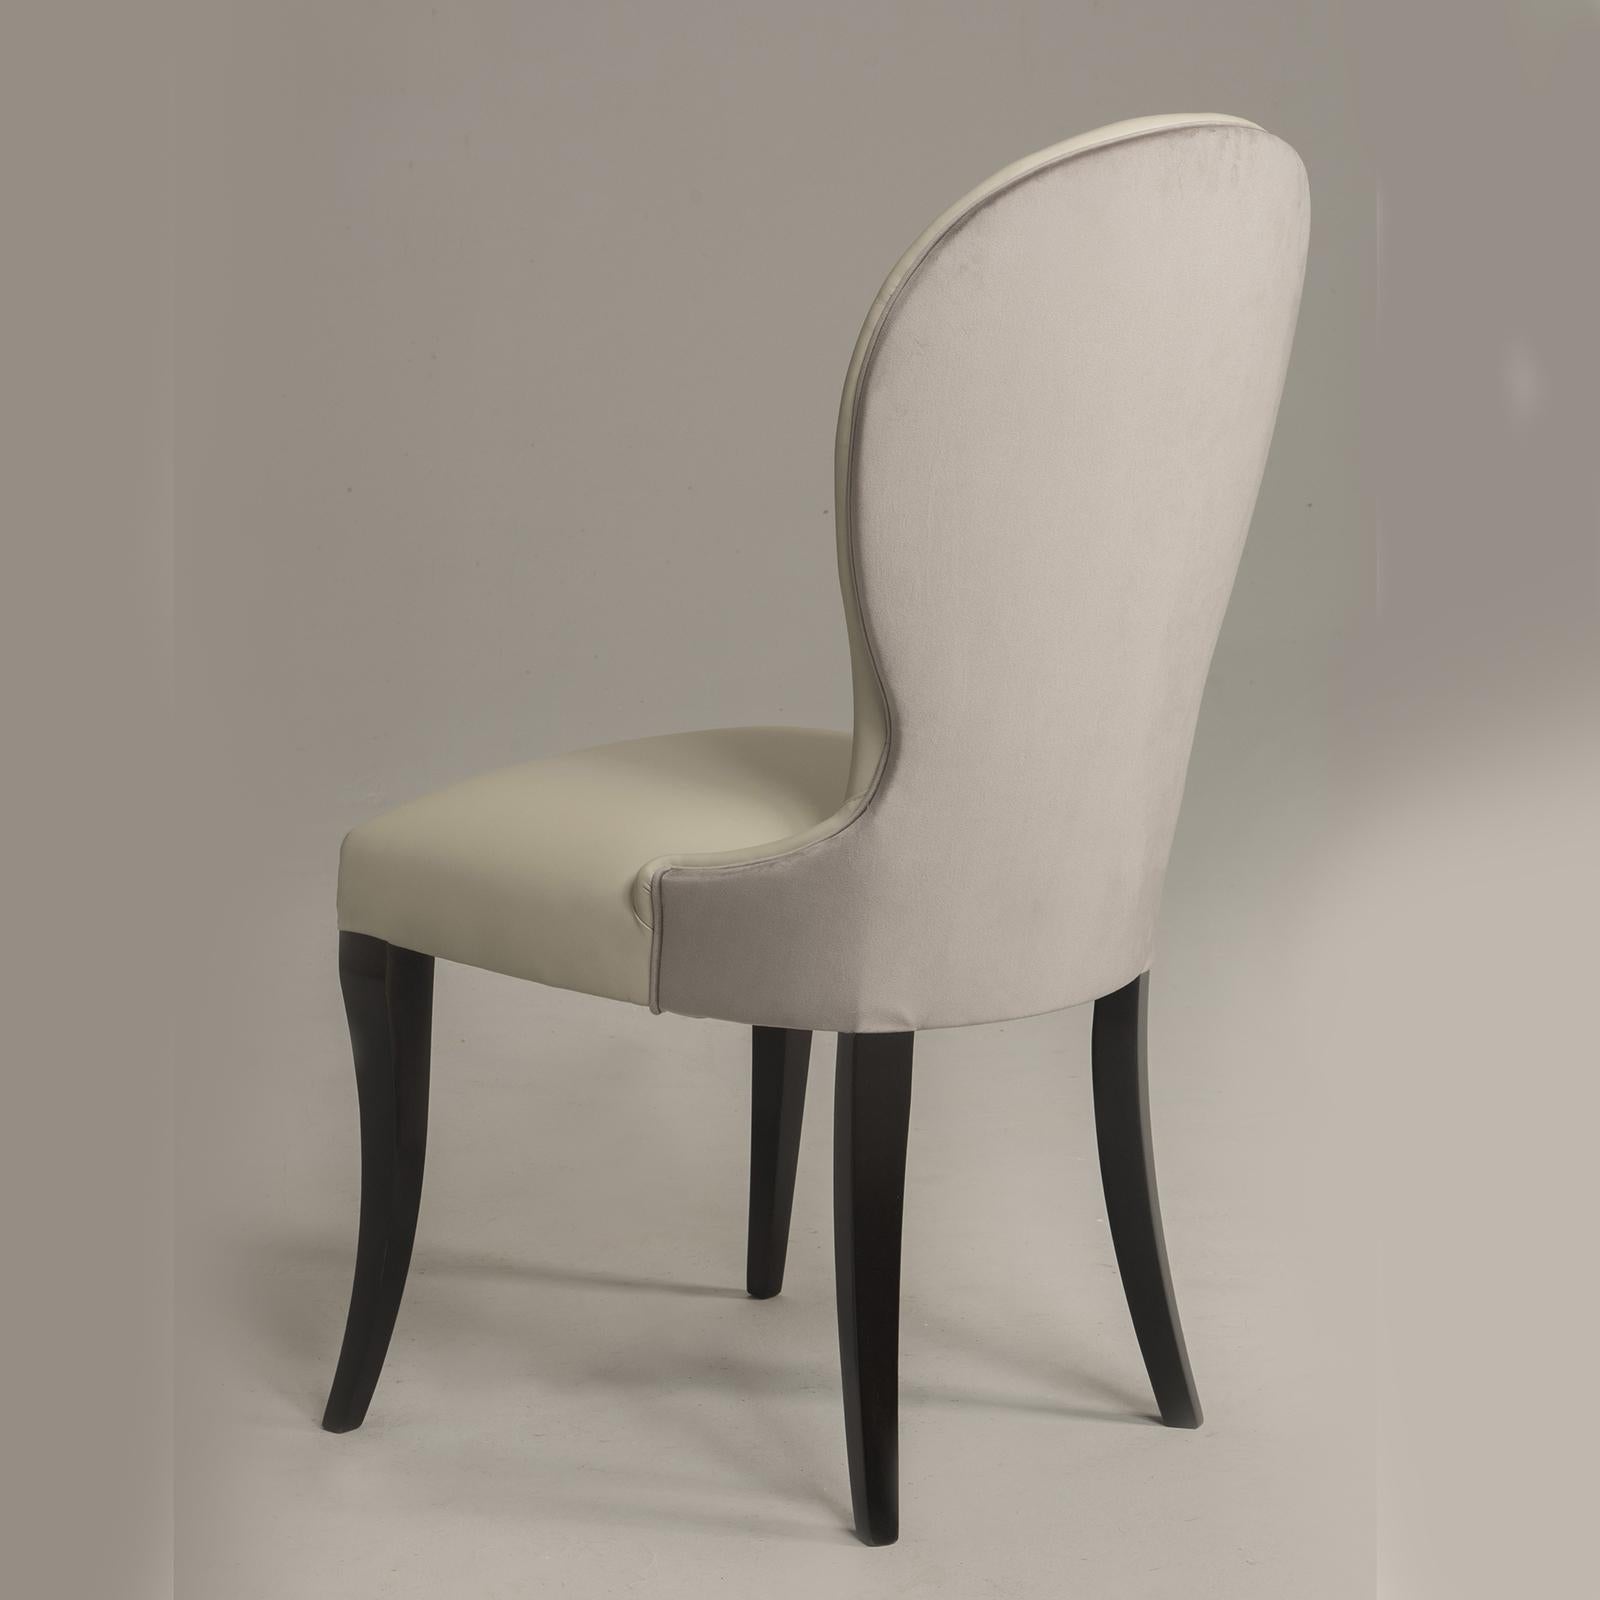 A sophisticated addition to any decor with a contemporary and elegant flavor, this stylish Oscar Collection Chair combines tradition and modernity with a splendid design featuring deluxe elements in wood and fabric of exceptional quality. Featuring